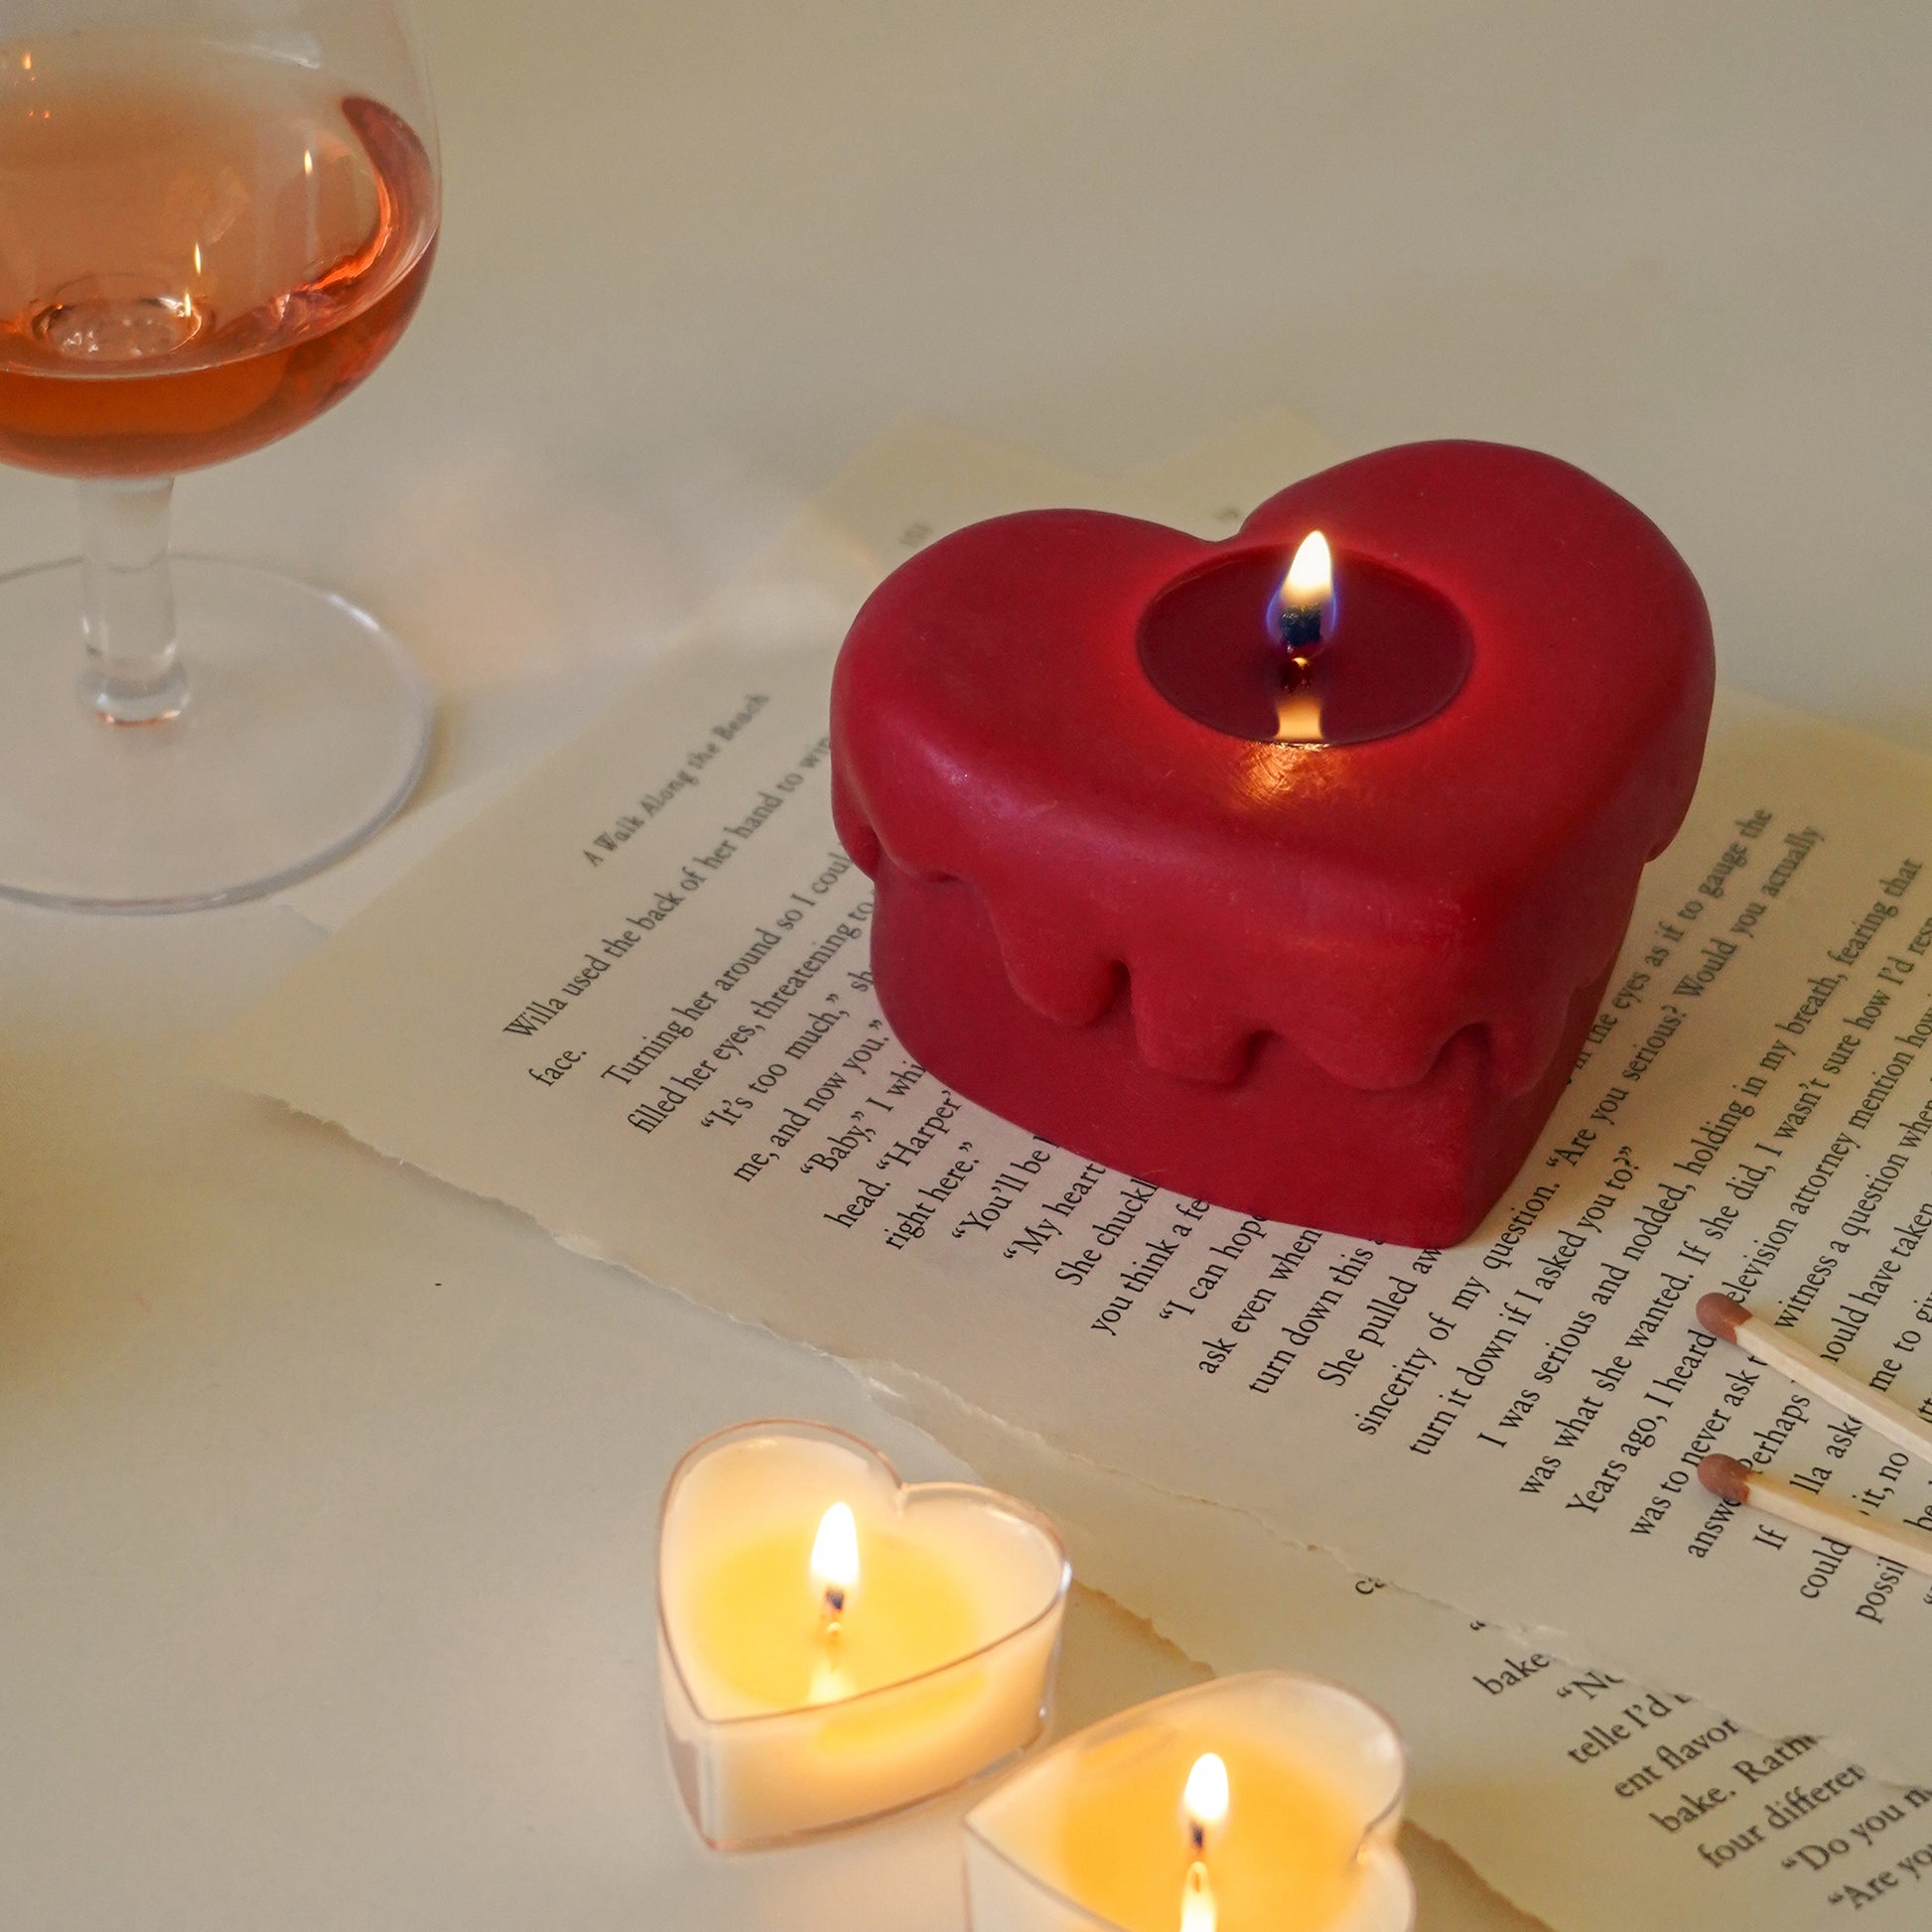 red melting heart candle on book pages, a glass of rose wine and two heart tealight candles